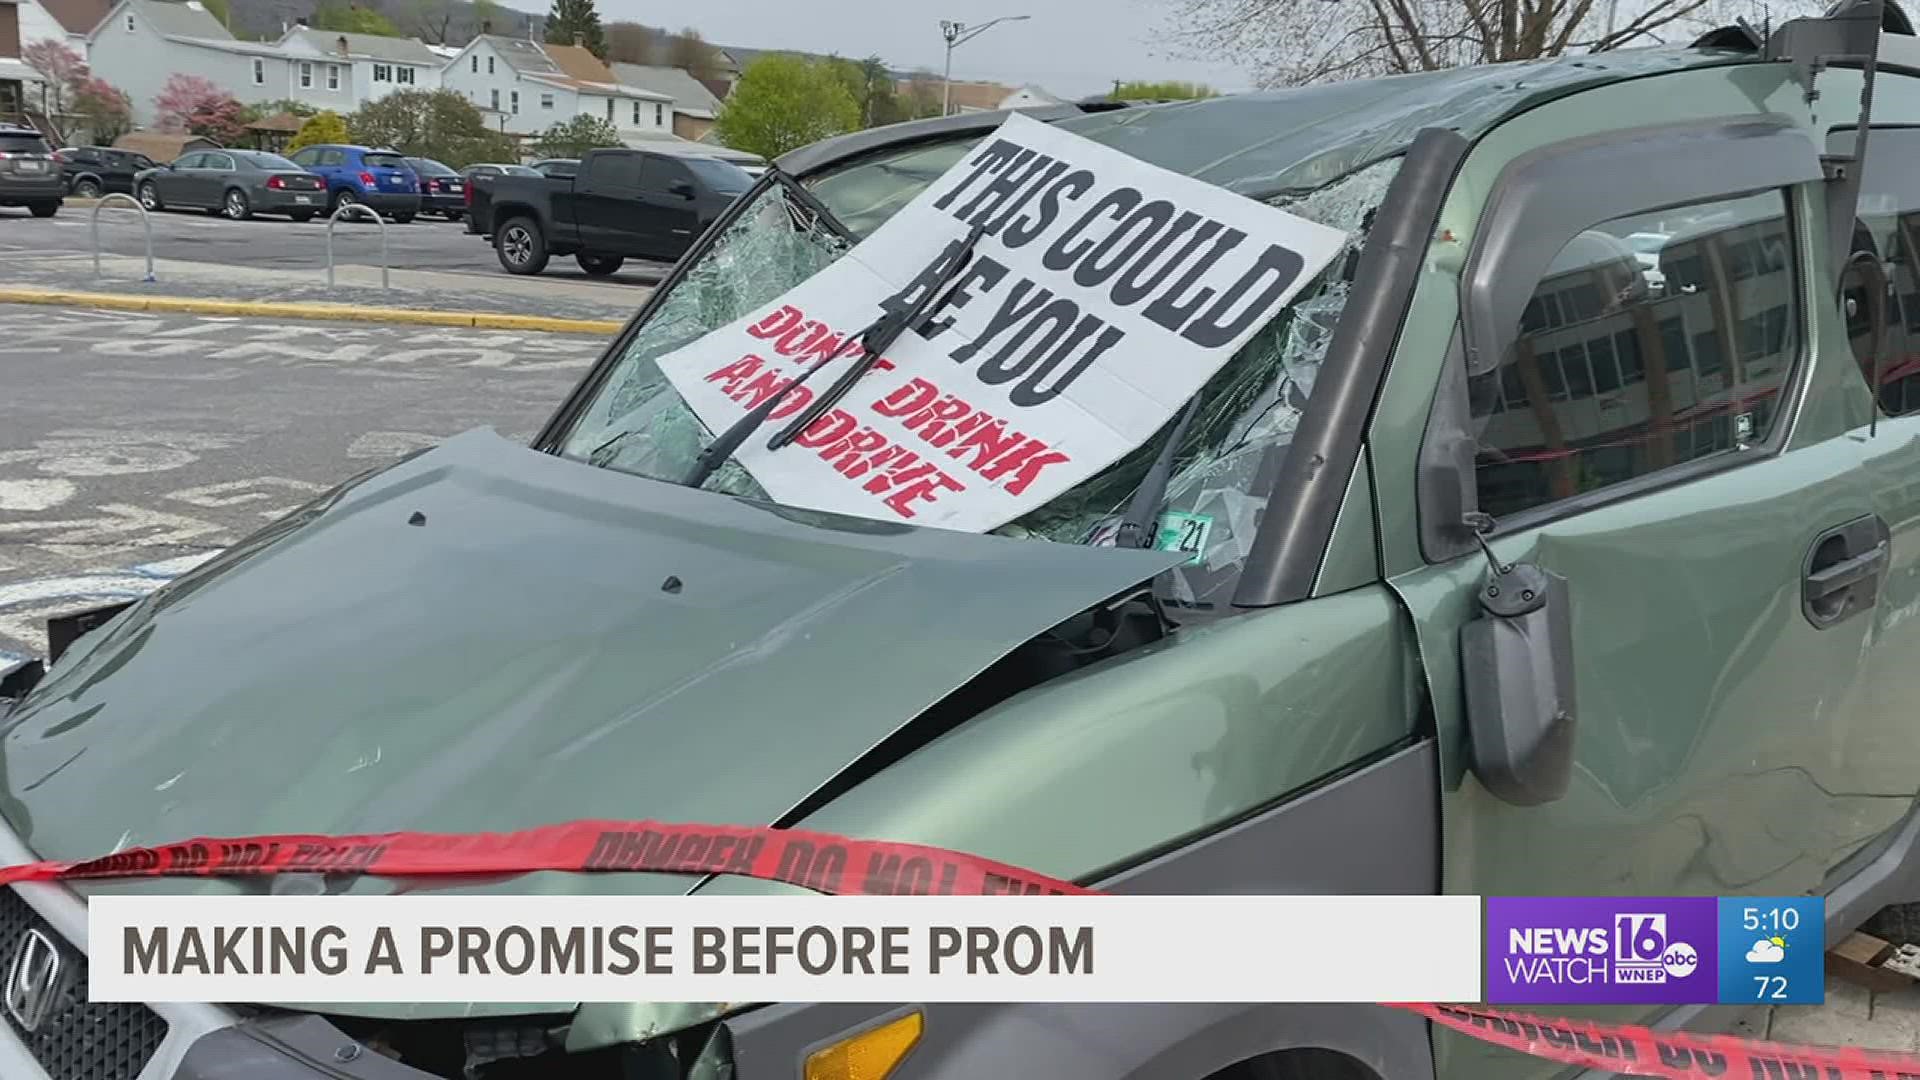 From putting ribbons on cars to signing a key Tamaqua area high school does their prom promise week every school year to remind students to be safe on prom night.